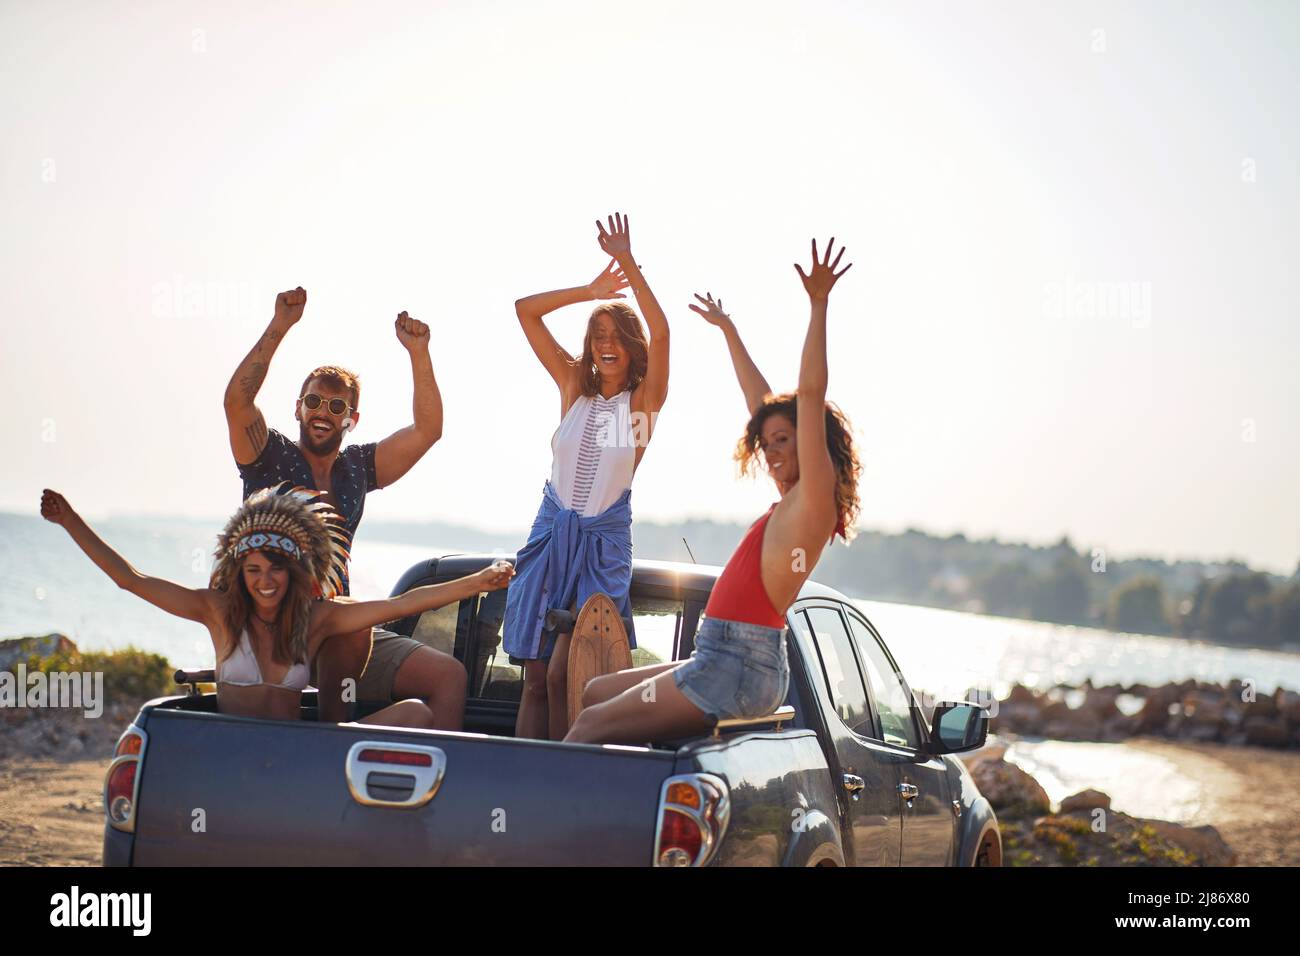 A group of young handsome models sitting on the back of a car and enjoying music on a beautiful sunny day at sea. Summer, sea, vacation, friendship Stock Photo